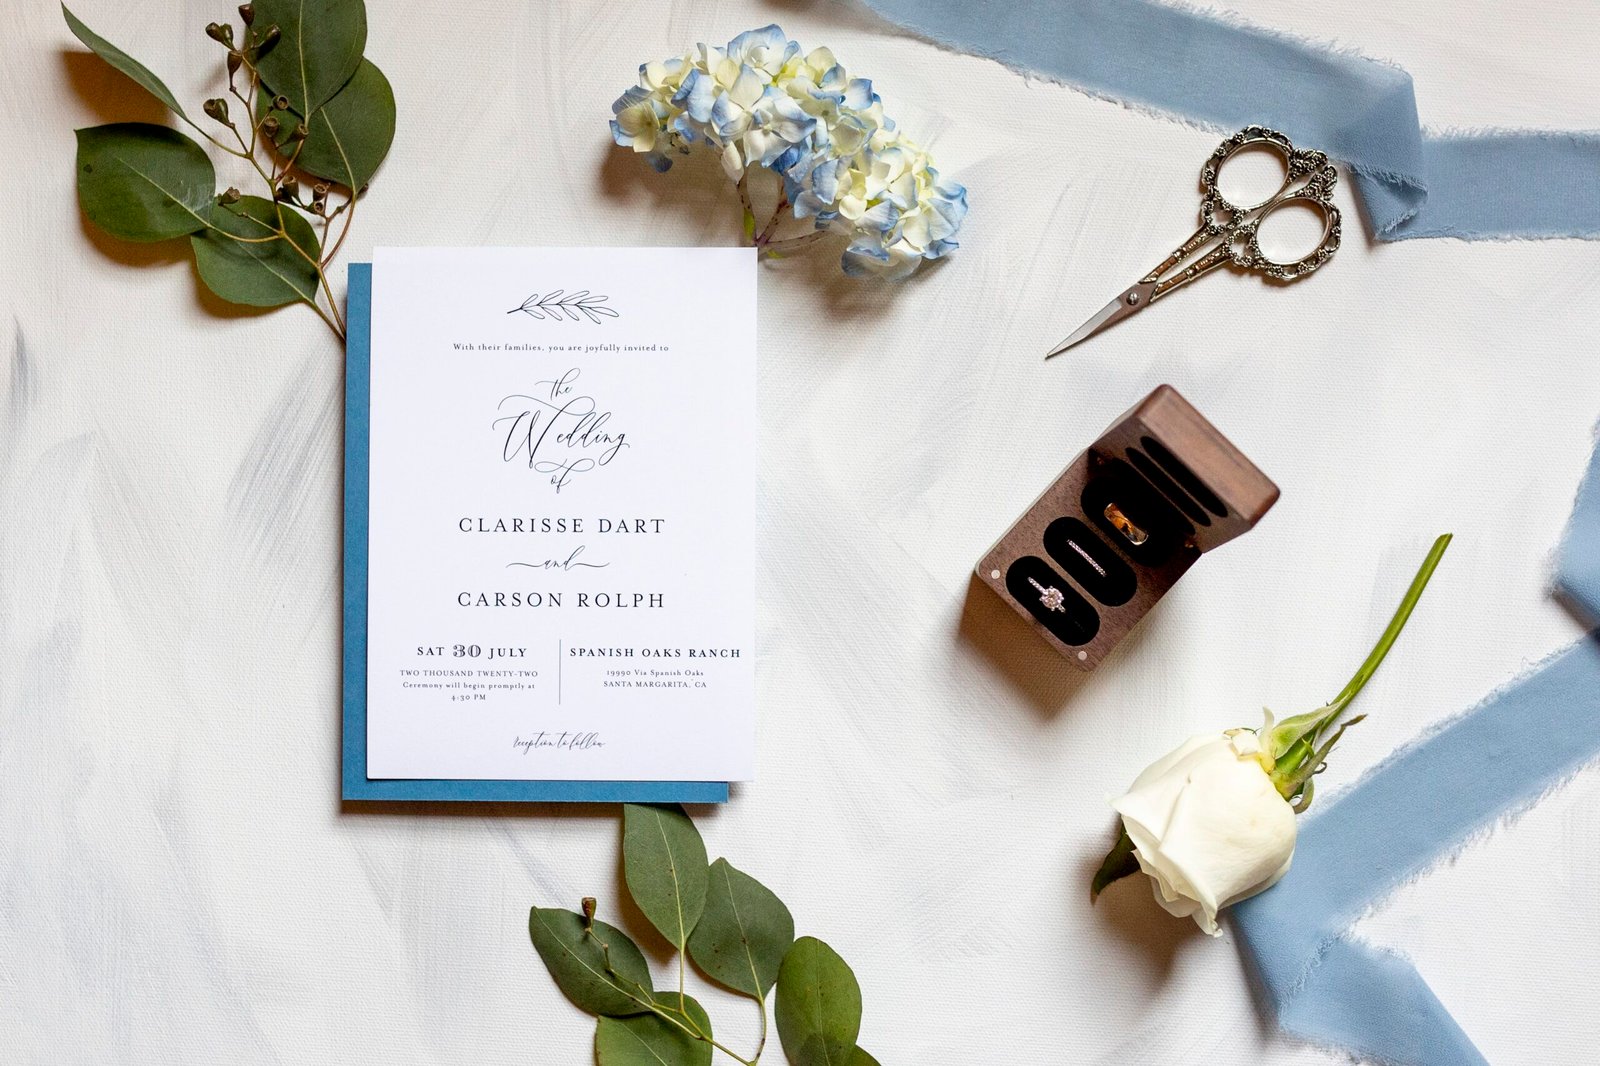 wedding invitation with flowers and greenery